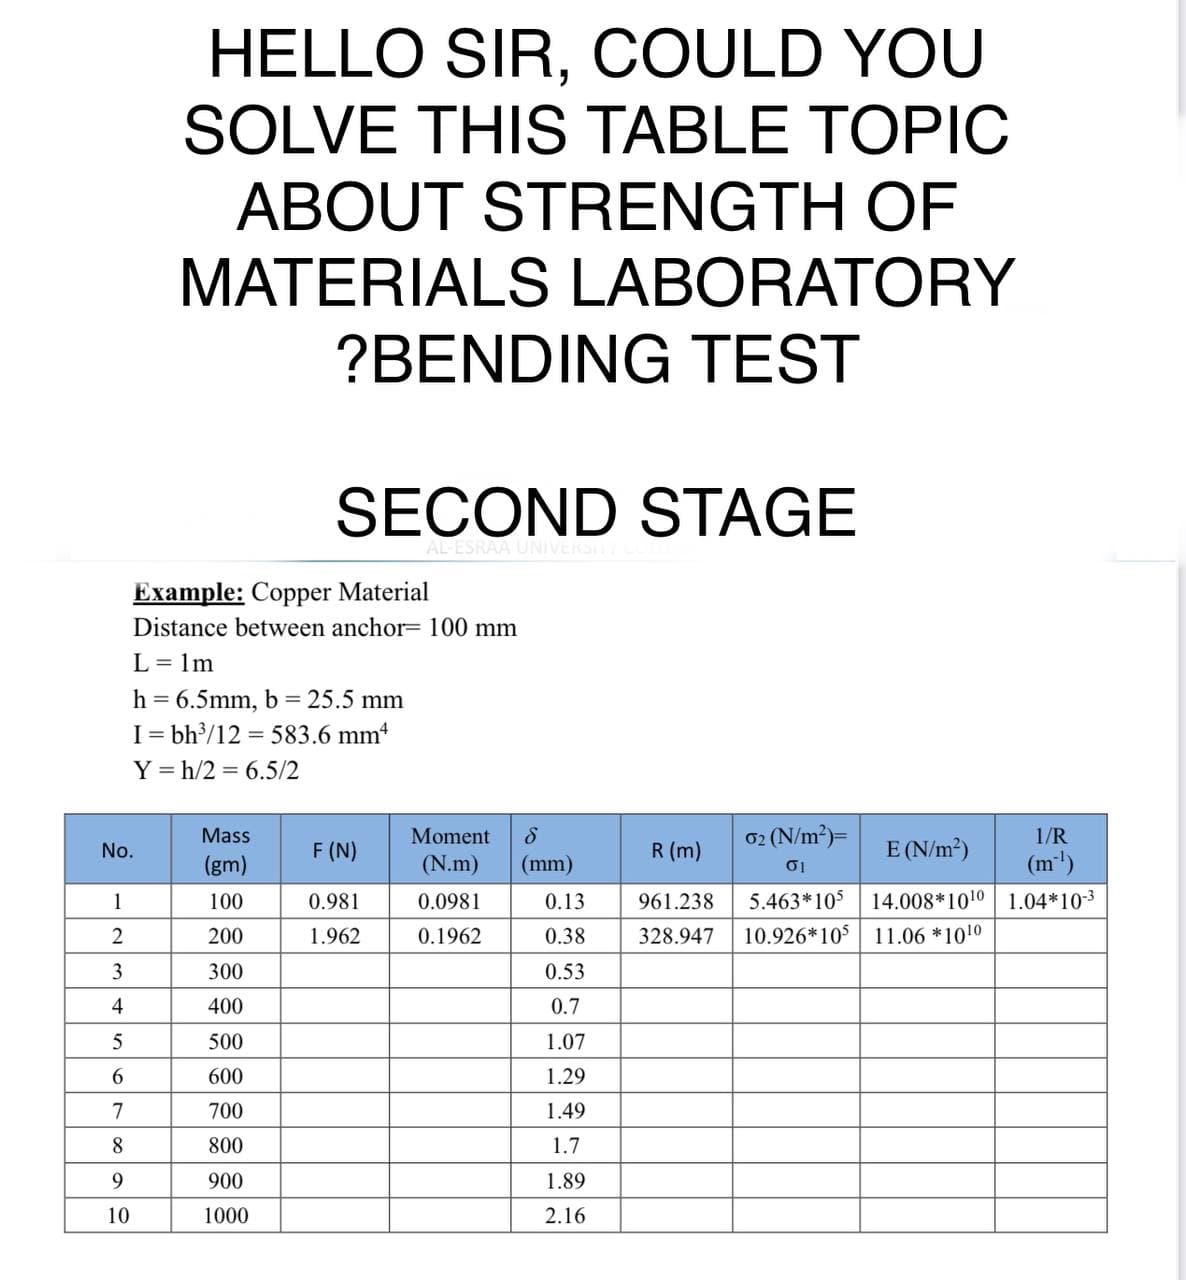 HELLO SIR, COULD YOU
SOLVE THIS TABLE TOPIC
ABOUT STRENGTH OF
MATERIALS LABORATORY
?BENDING TEST
SECOND STAGE
AL ESRAA
Example: Copper Material
Distance between anchor= 100 mm
L = 1m
h = 6.5mm, b = 25.5 mm
I= bh/12 = 583.6 mm
Y = h/2 = 6.5/2
Mass
F (N)
Moment
02 (N/m?)=
E (N/m?)
1/R
No.
R (m)
(gm)
(N.m)
(mm)
(m)
1
100
0.981
0.0981
0.13
961.238
5.463*105
14.008*1010 1.04*103
2
200
1.962
0.1962
0.38
328.947
10.926*105 11.06 *1010
3
300
0.53
4
400
0.7
500
1.07
6.
600
1.29
7
700
1.49
8
800
1.7
9.
900
1.89
10
1000
2.16
